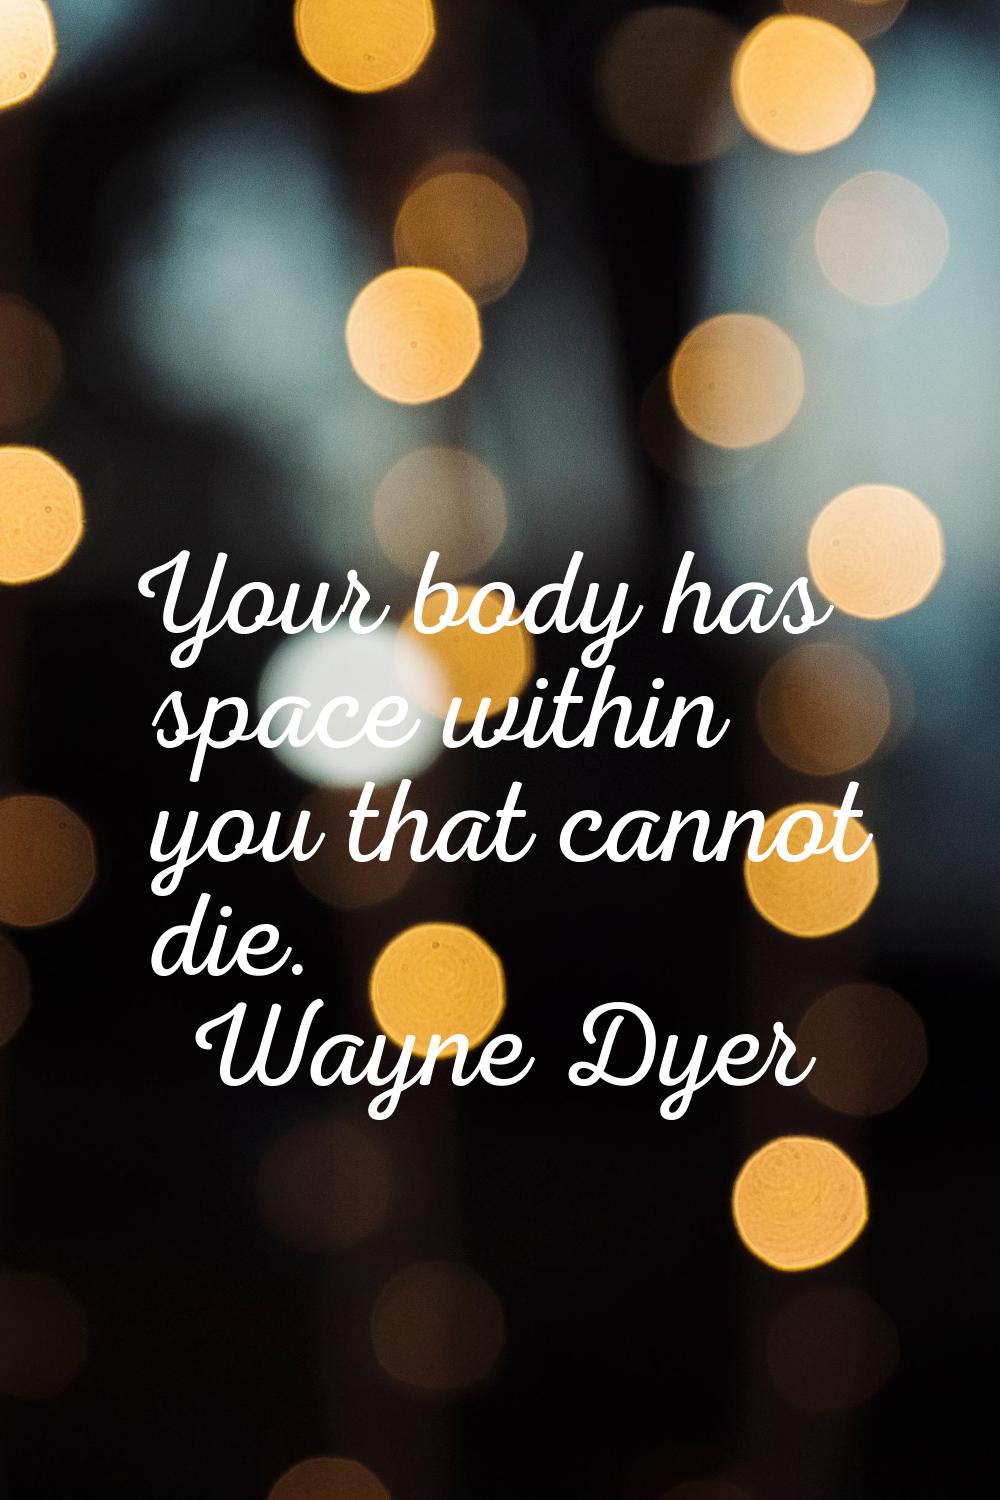 Your body has space within you that cannot die.